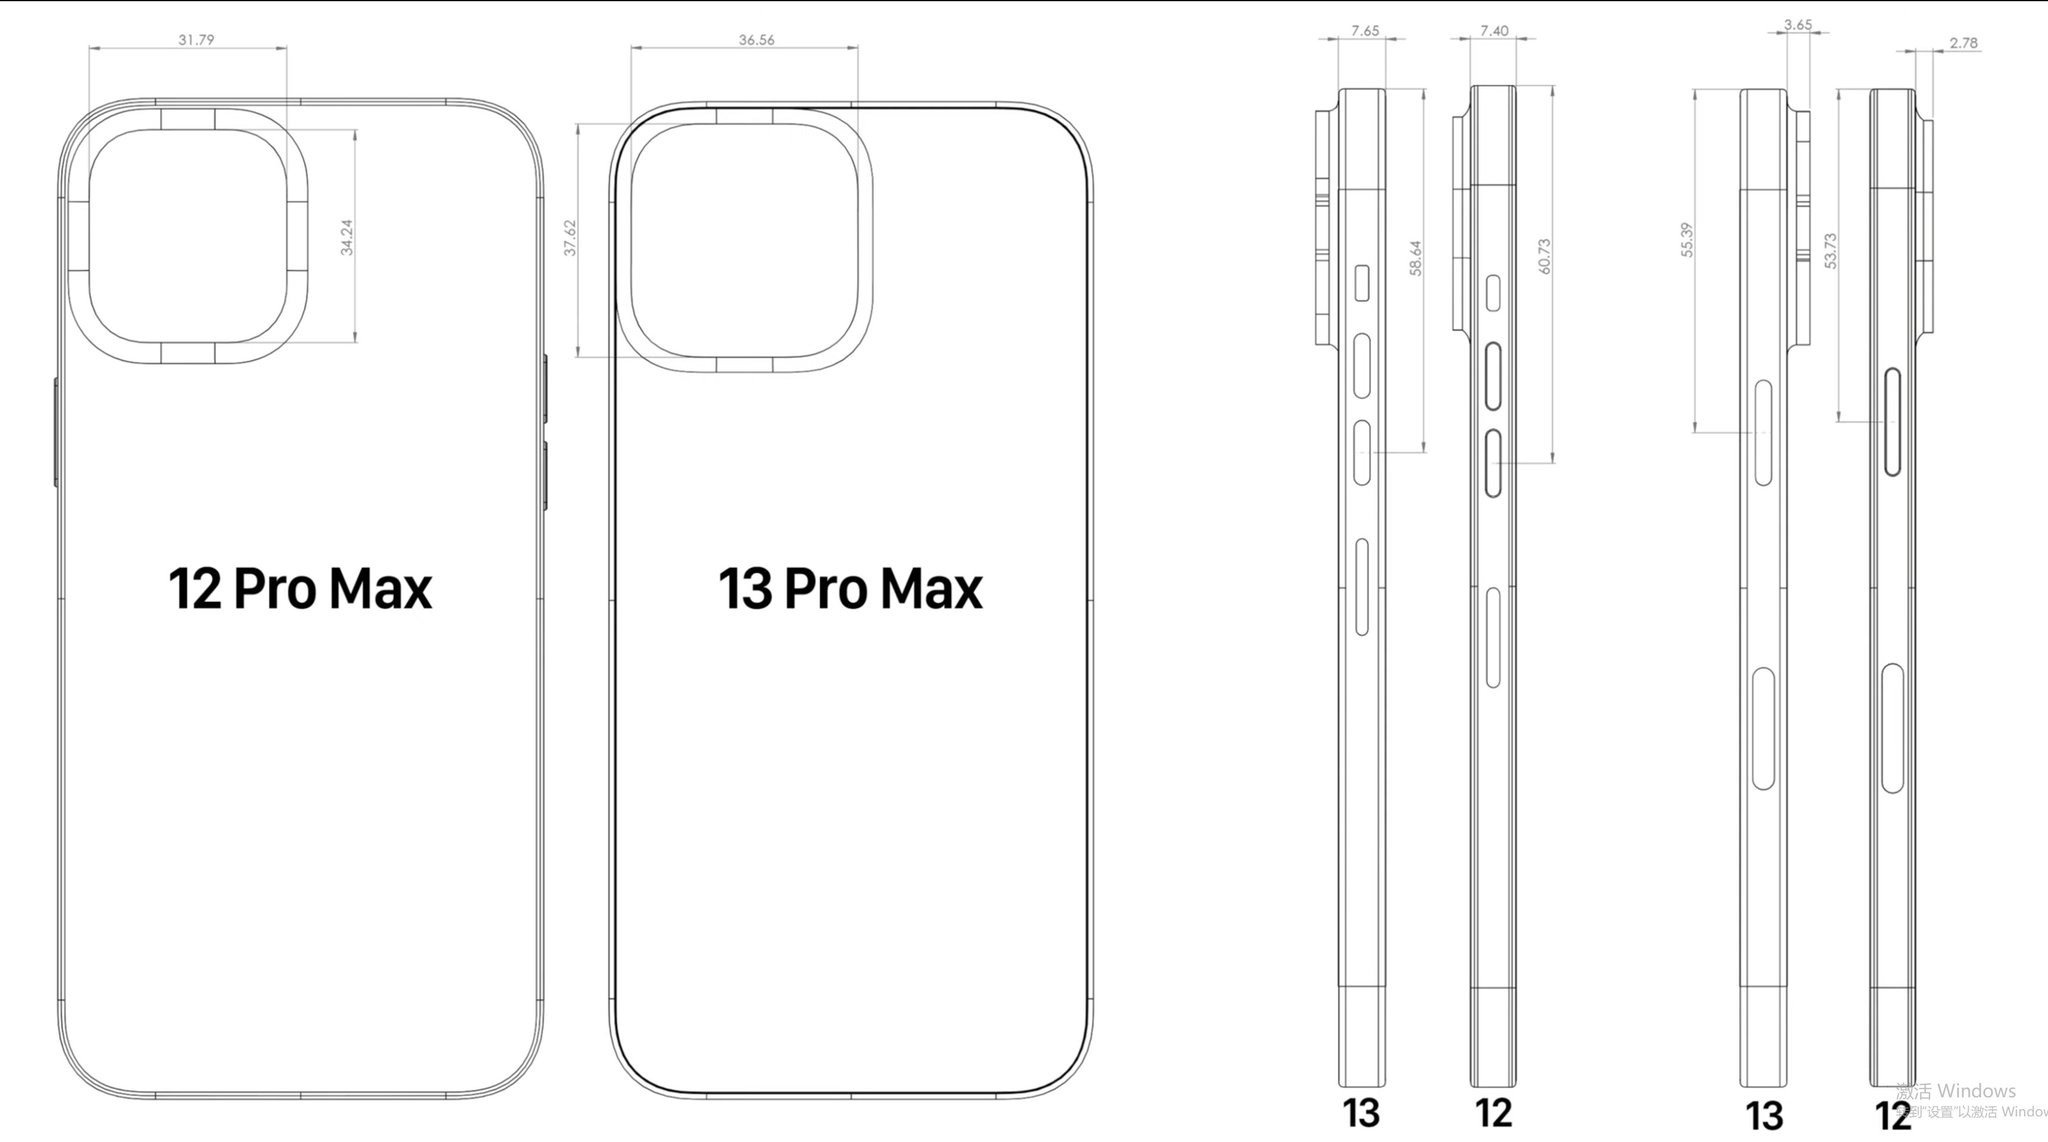 Leaked iPhone 13 Pro Max designs appear to show the camera is getting